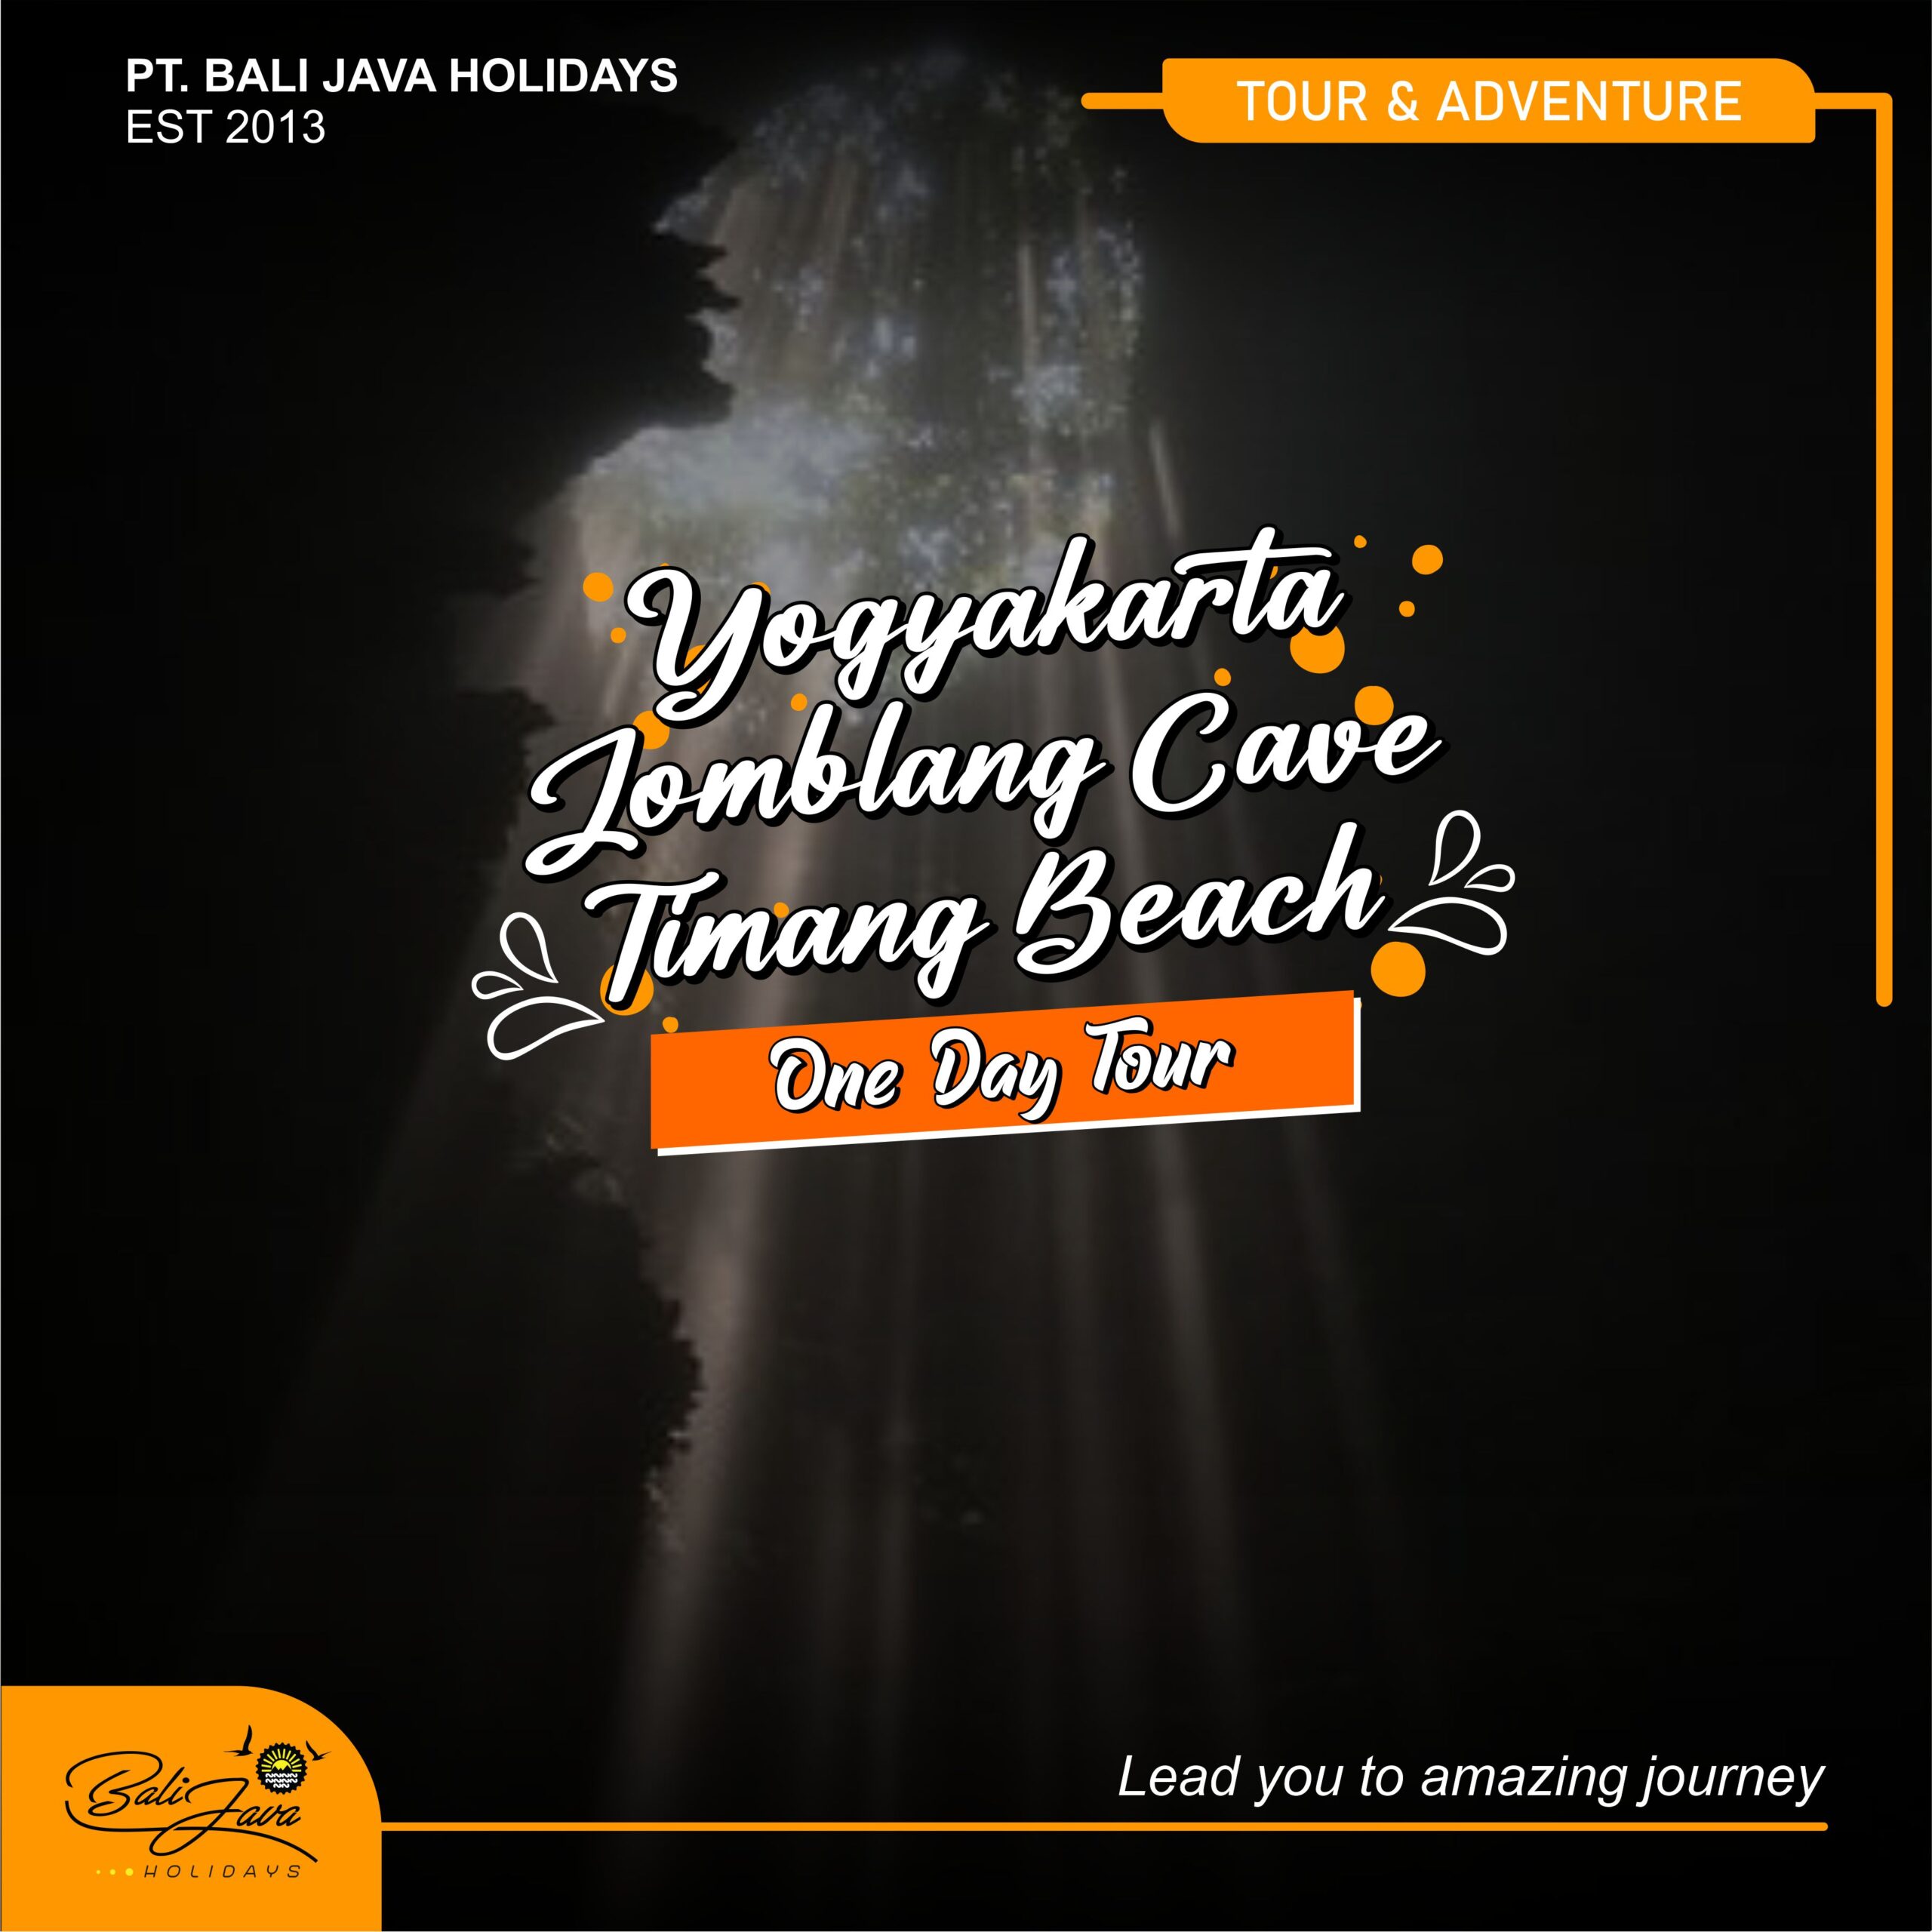 JOMBLANG CAVE – TIMANG BEACH – ONE DAY TOUR